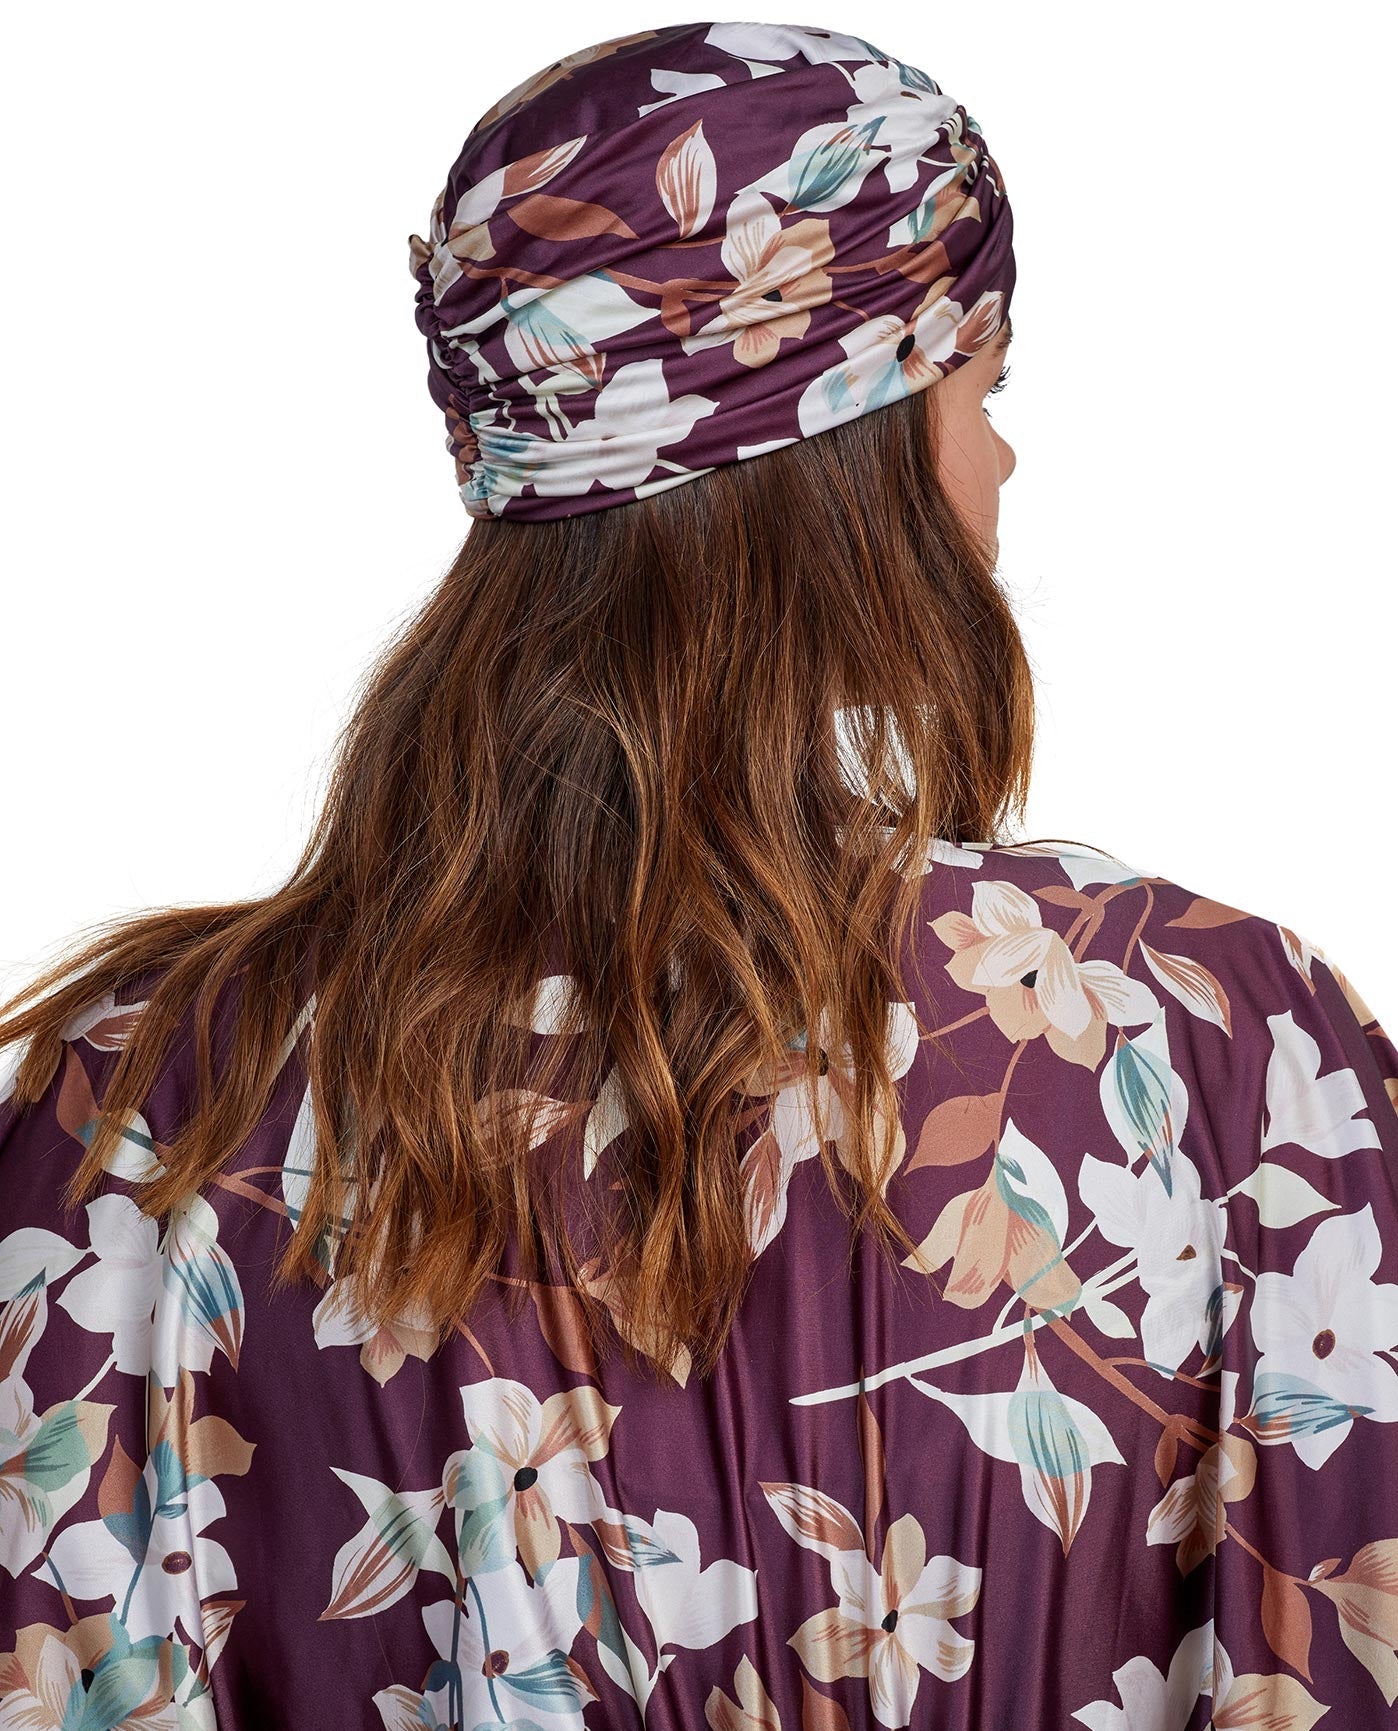 Back View Of Gottex Modest Knotted Hair Covering | GOTTEX MODEST AMORE MAUVE